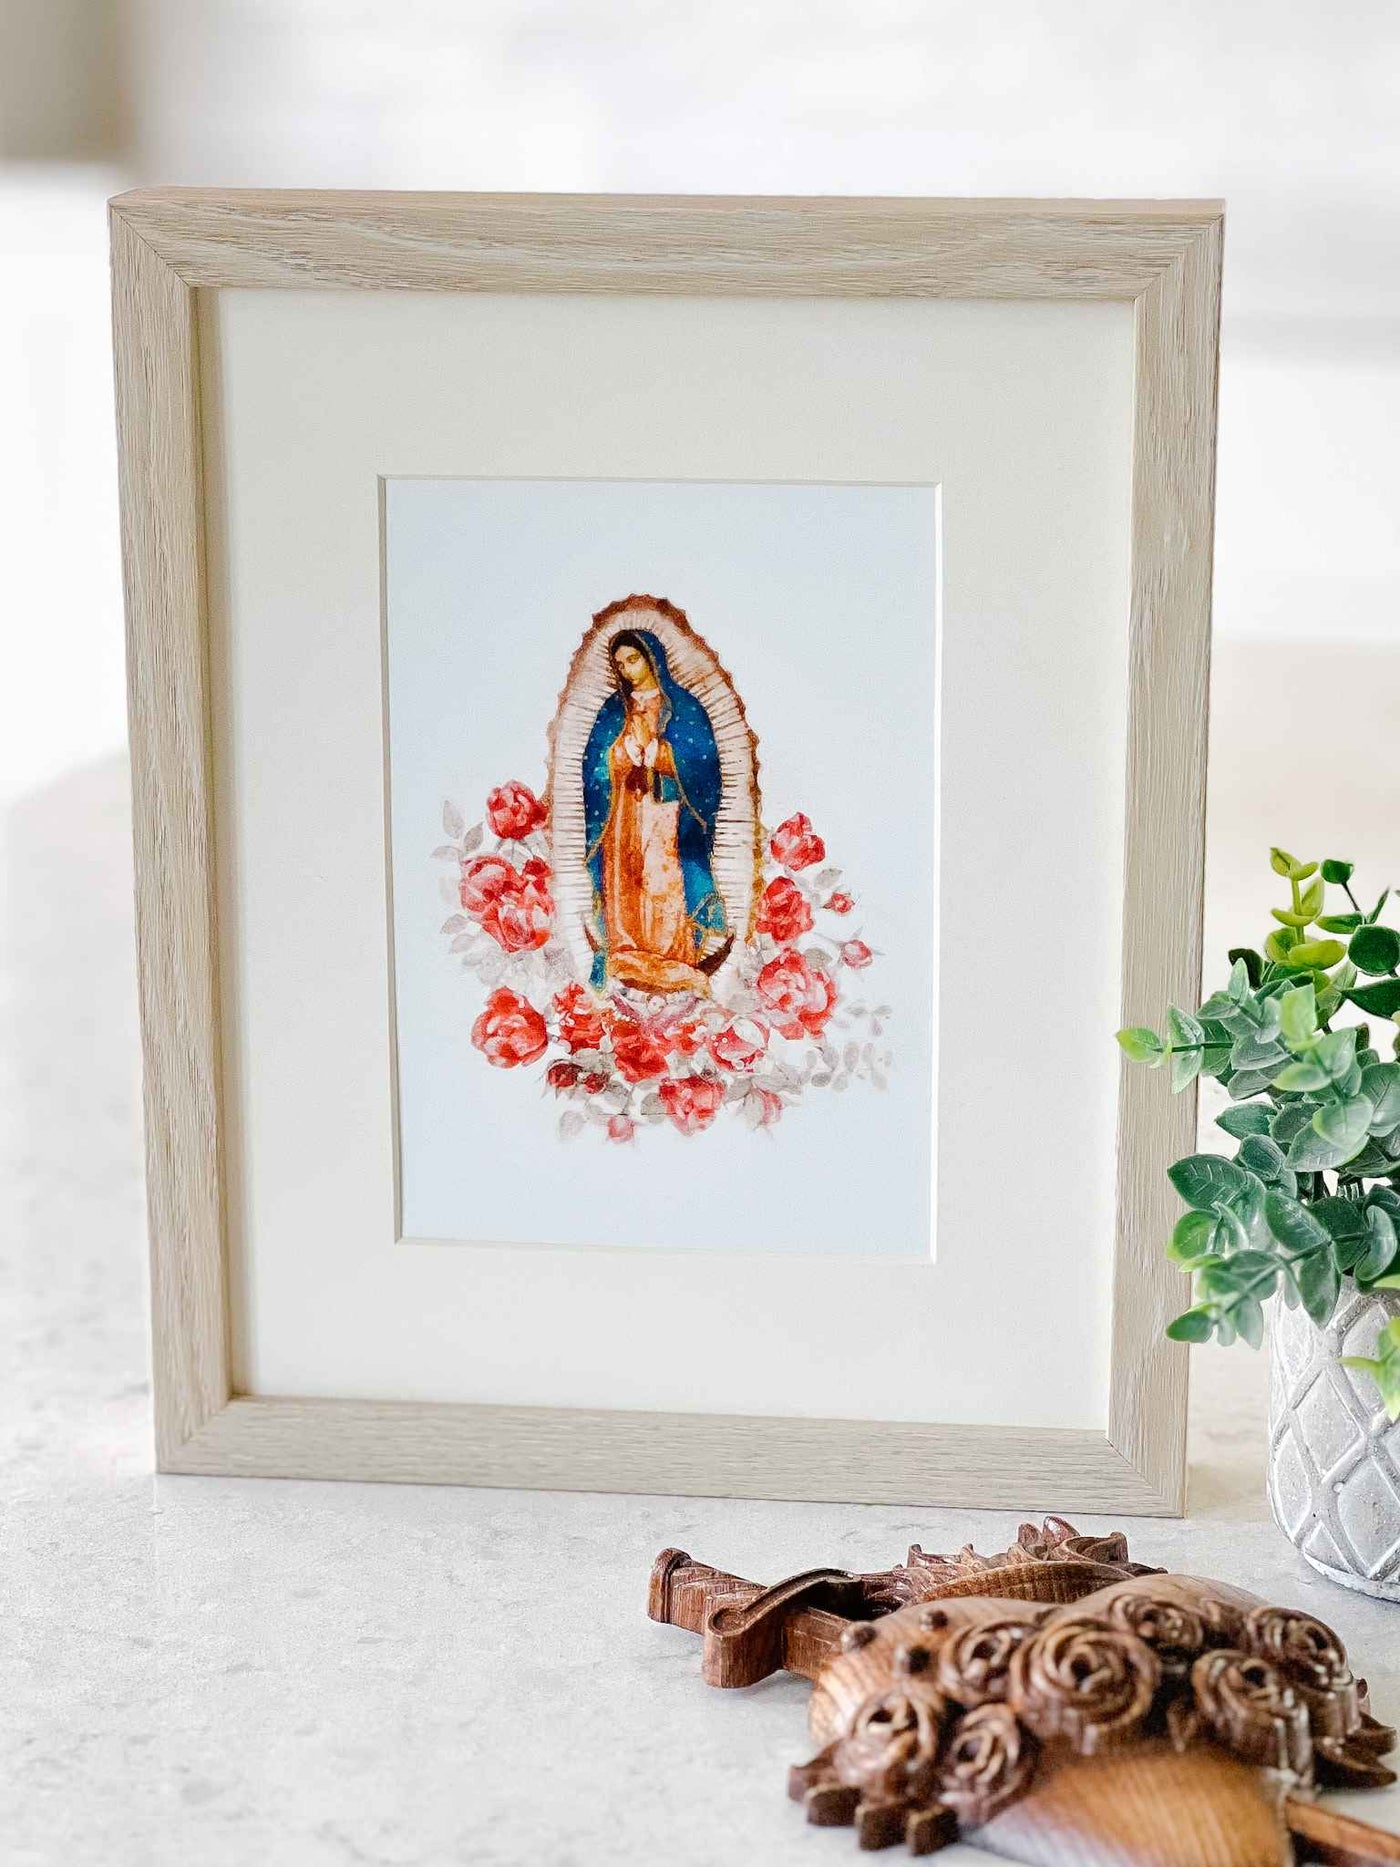 Our Lady of Guadalupe with Roses - Print